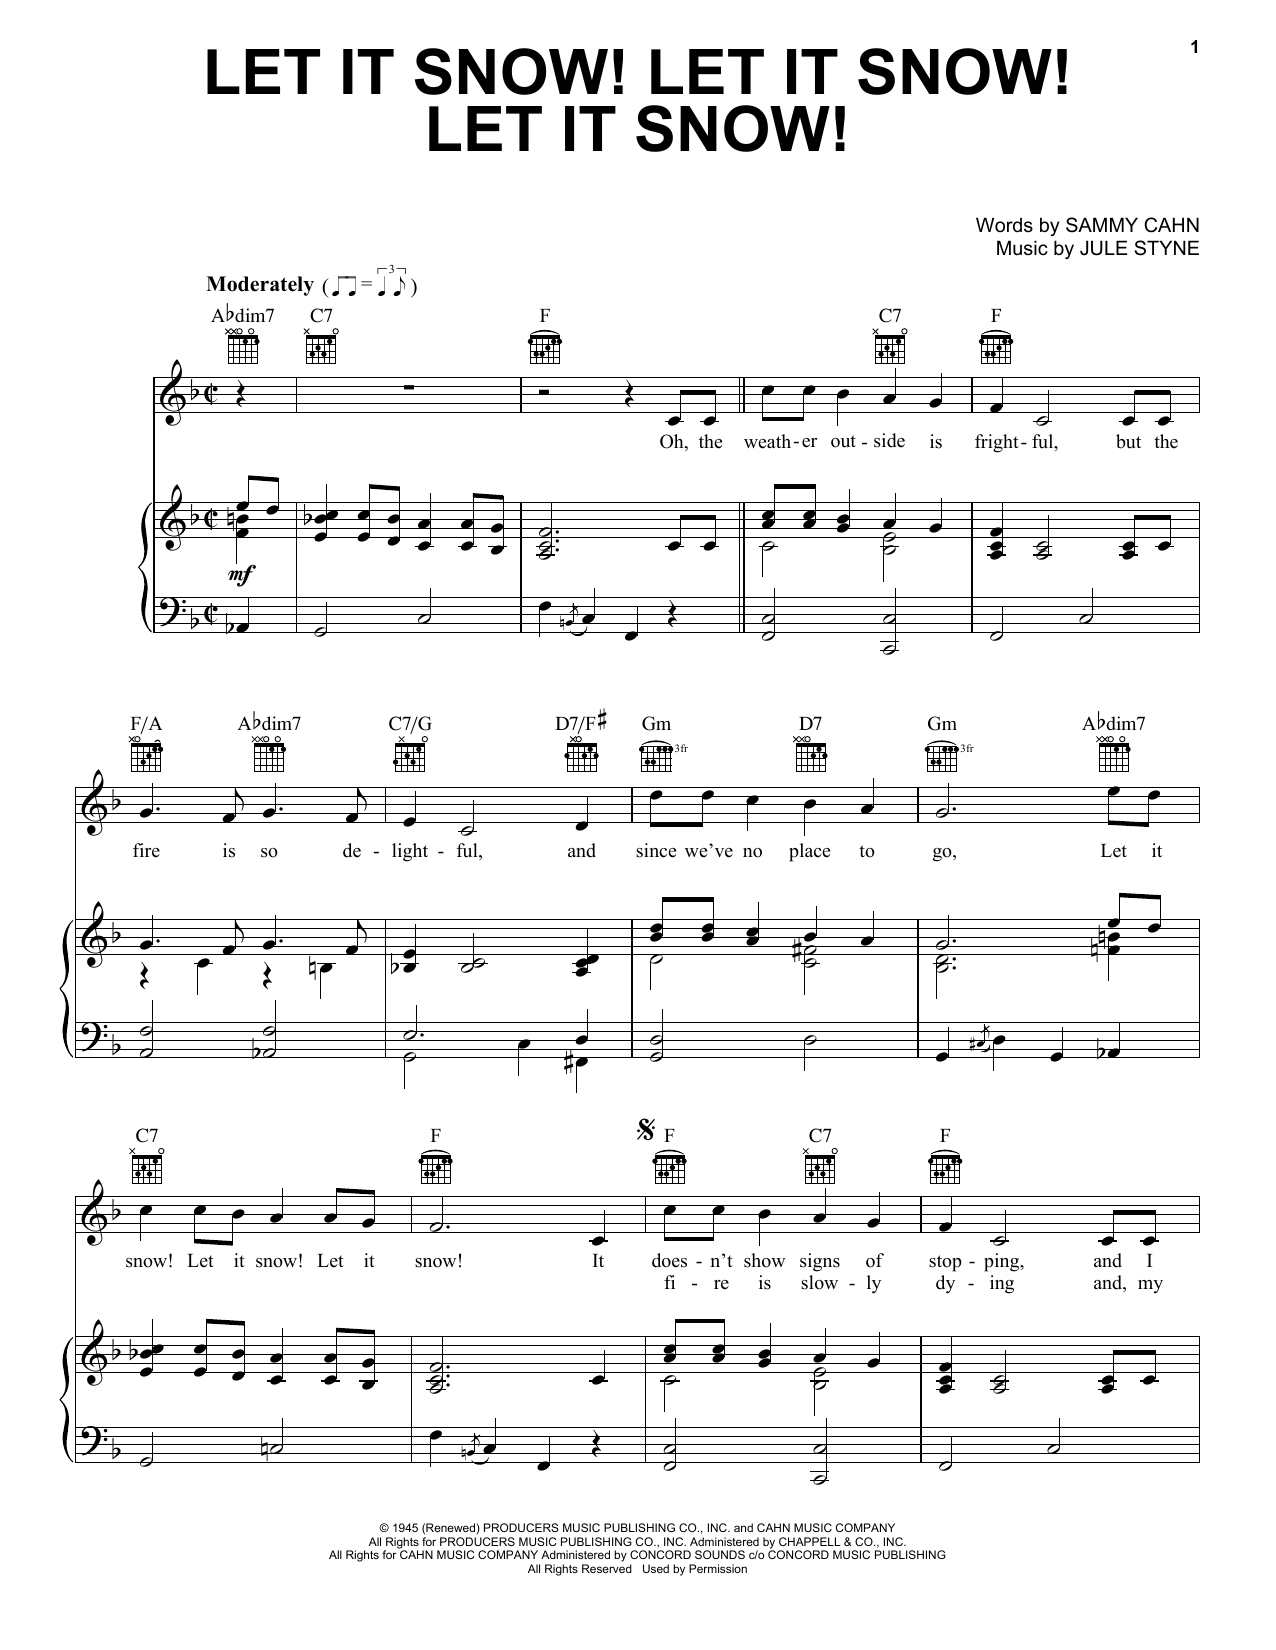 Sammy Cahn Let It Snow! Let It Snow! Let It Snow! sheet music notes and chords. Download Printable PDF.